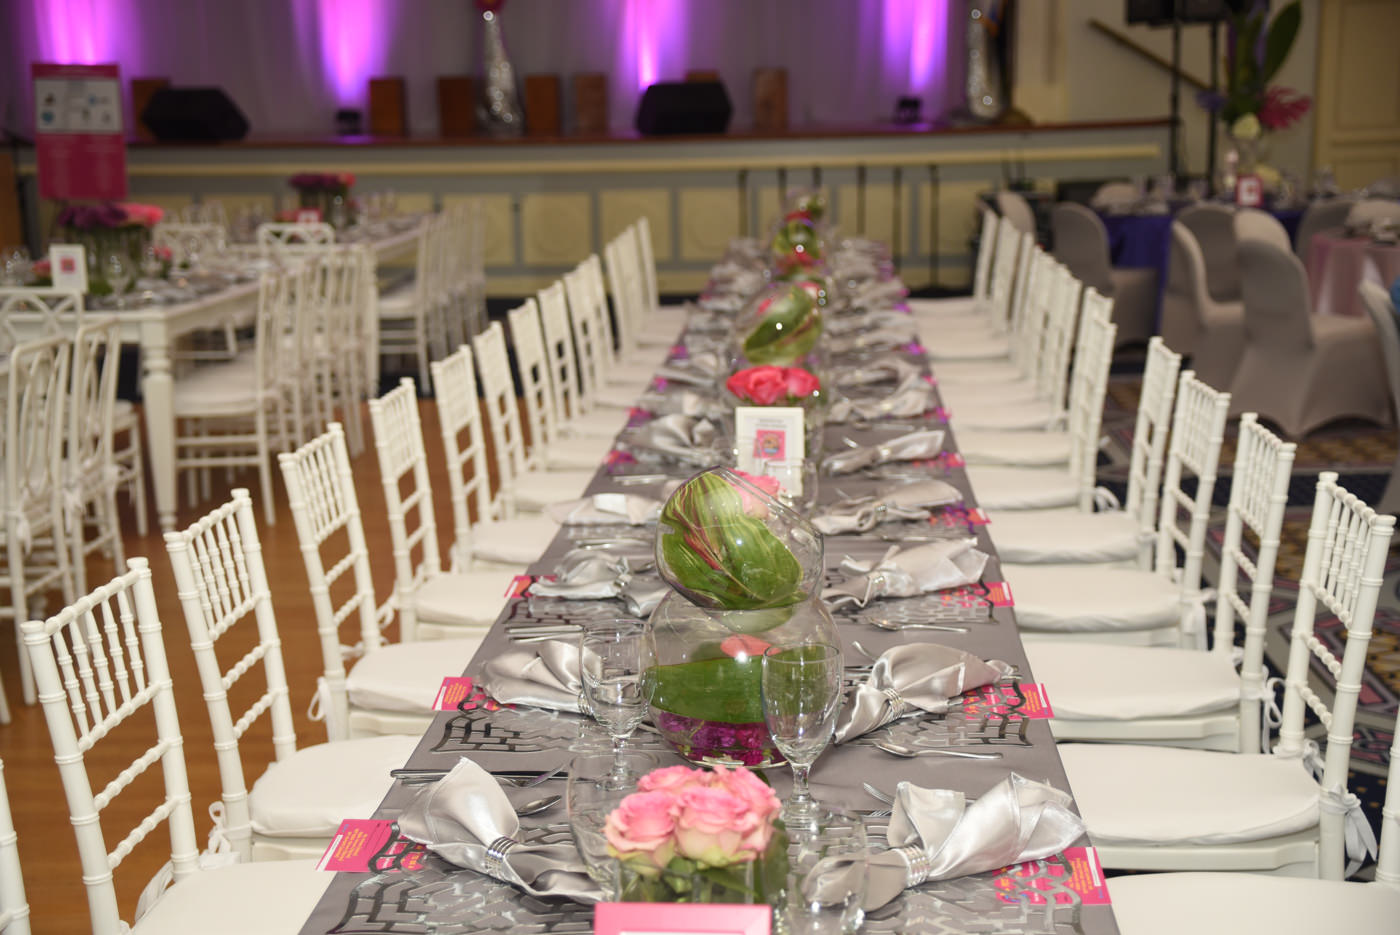 Long silver table with purple and pink flowers in vases and silver plate settings eccessories by ellen